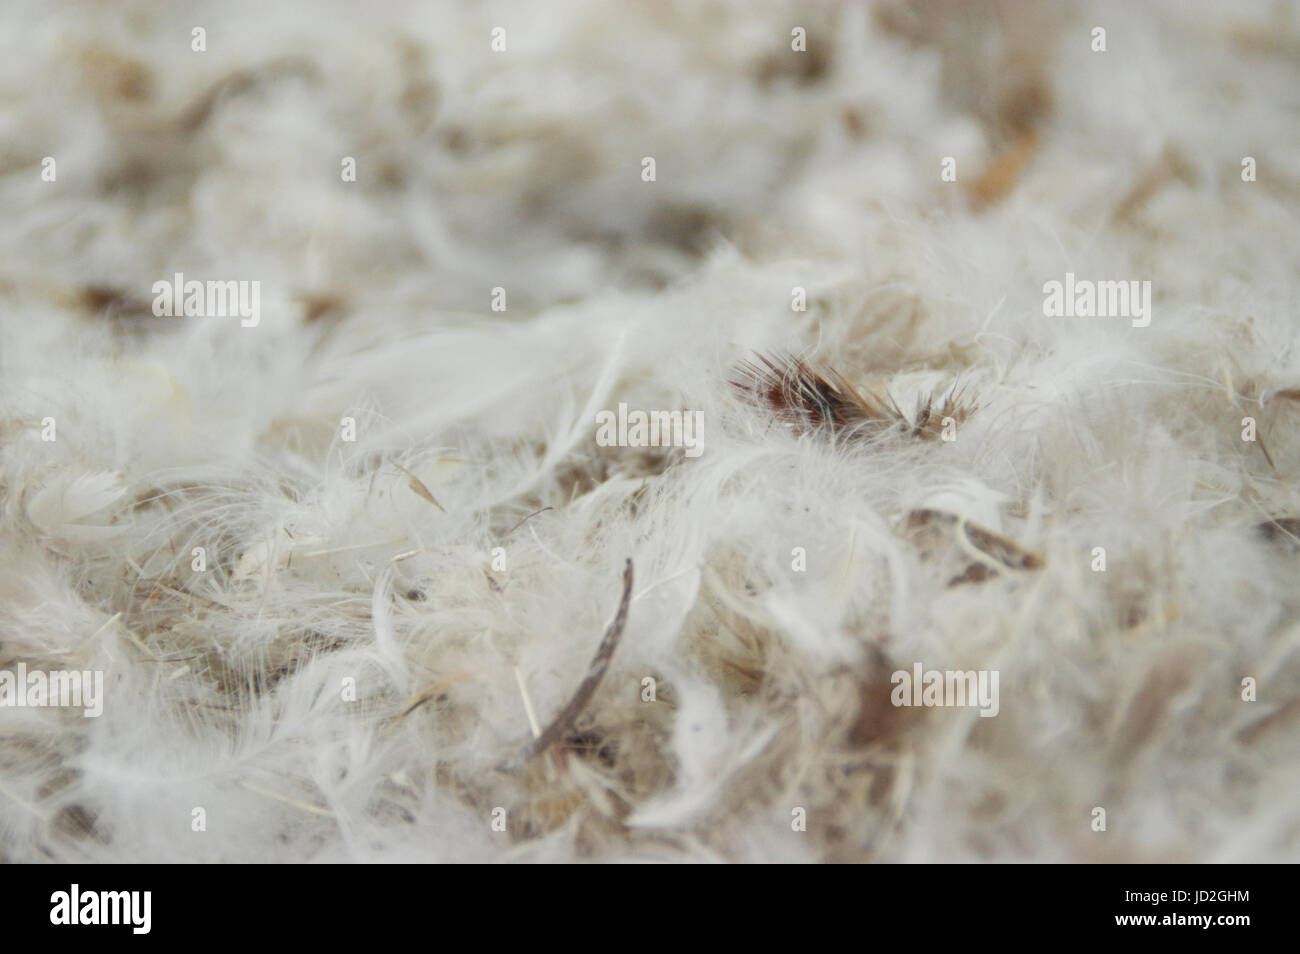 The pile of fluffy feathers. The plumage in close-up view. Stock Photo